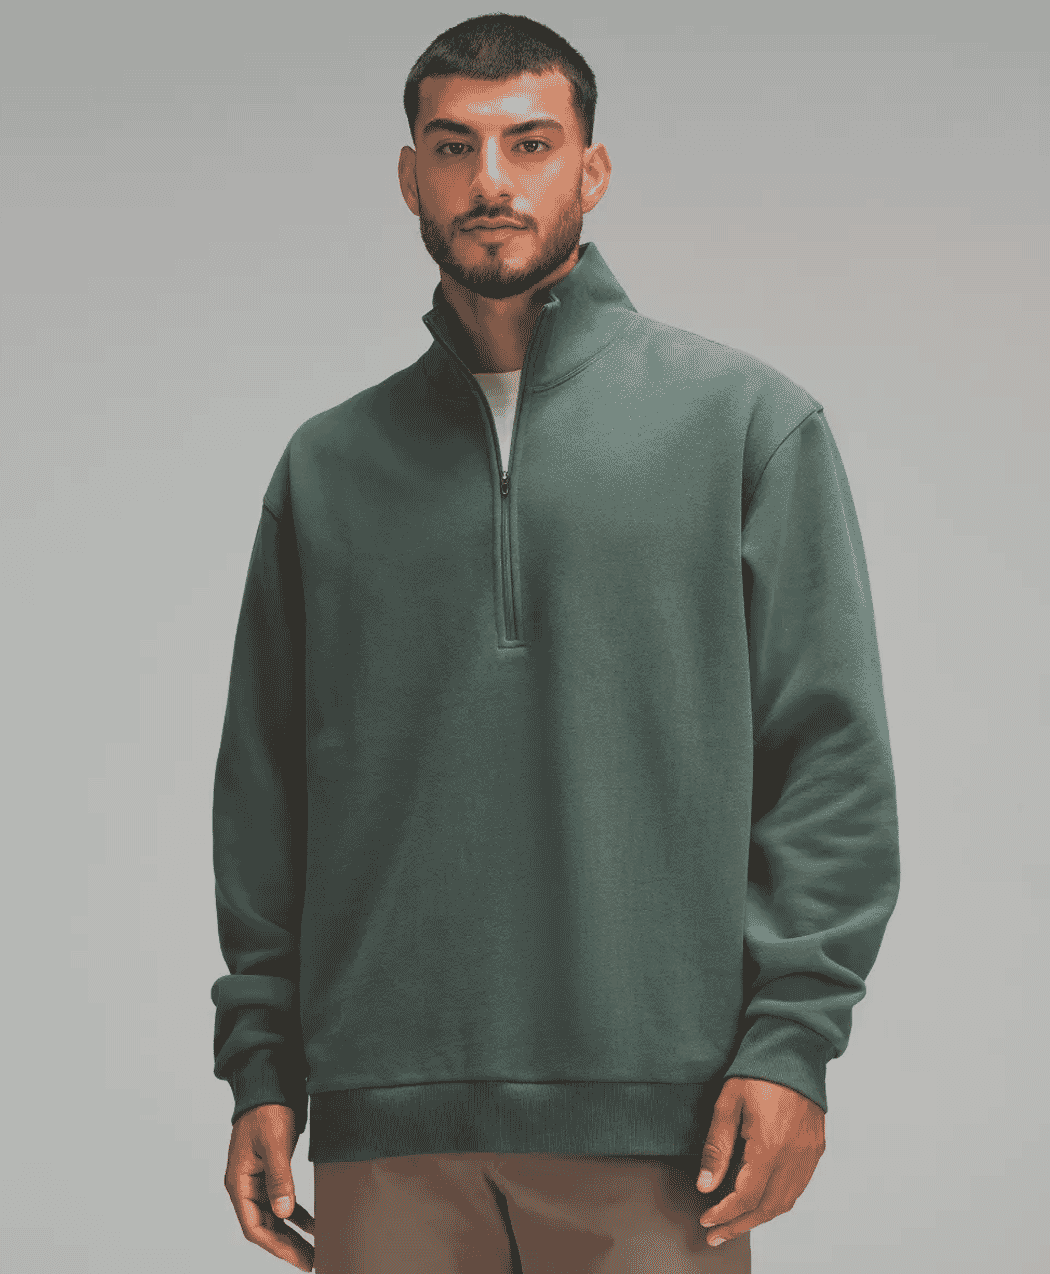 How to style a men's half zip sweater for fall | OPUMO Magazine